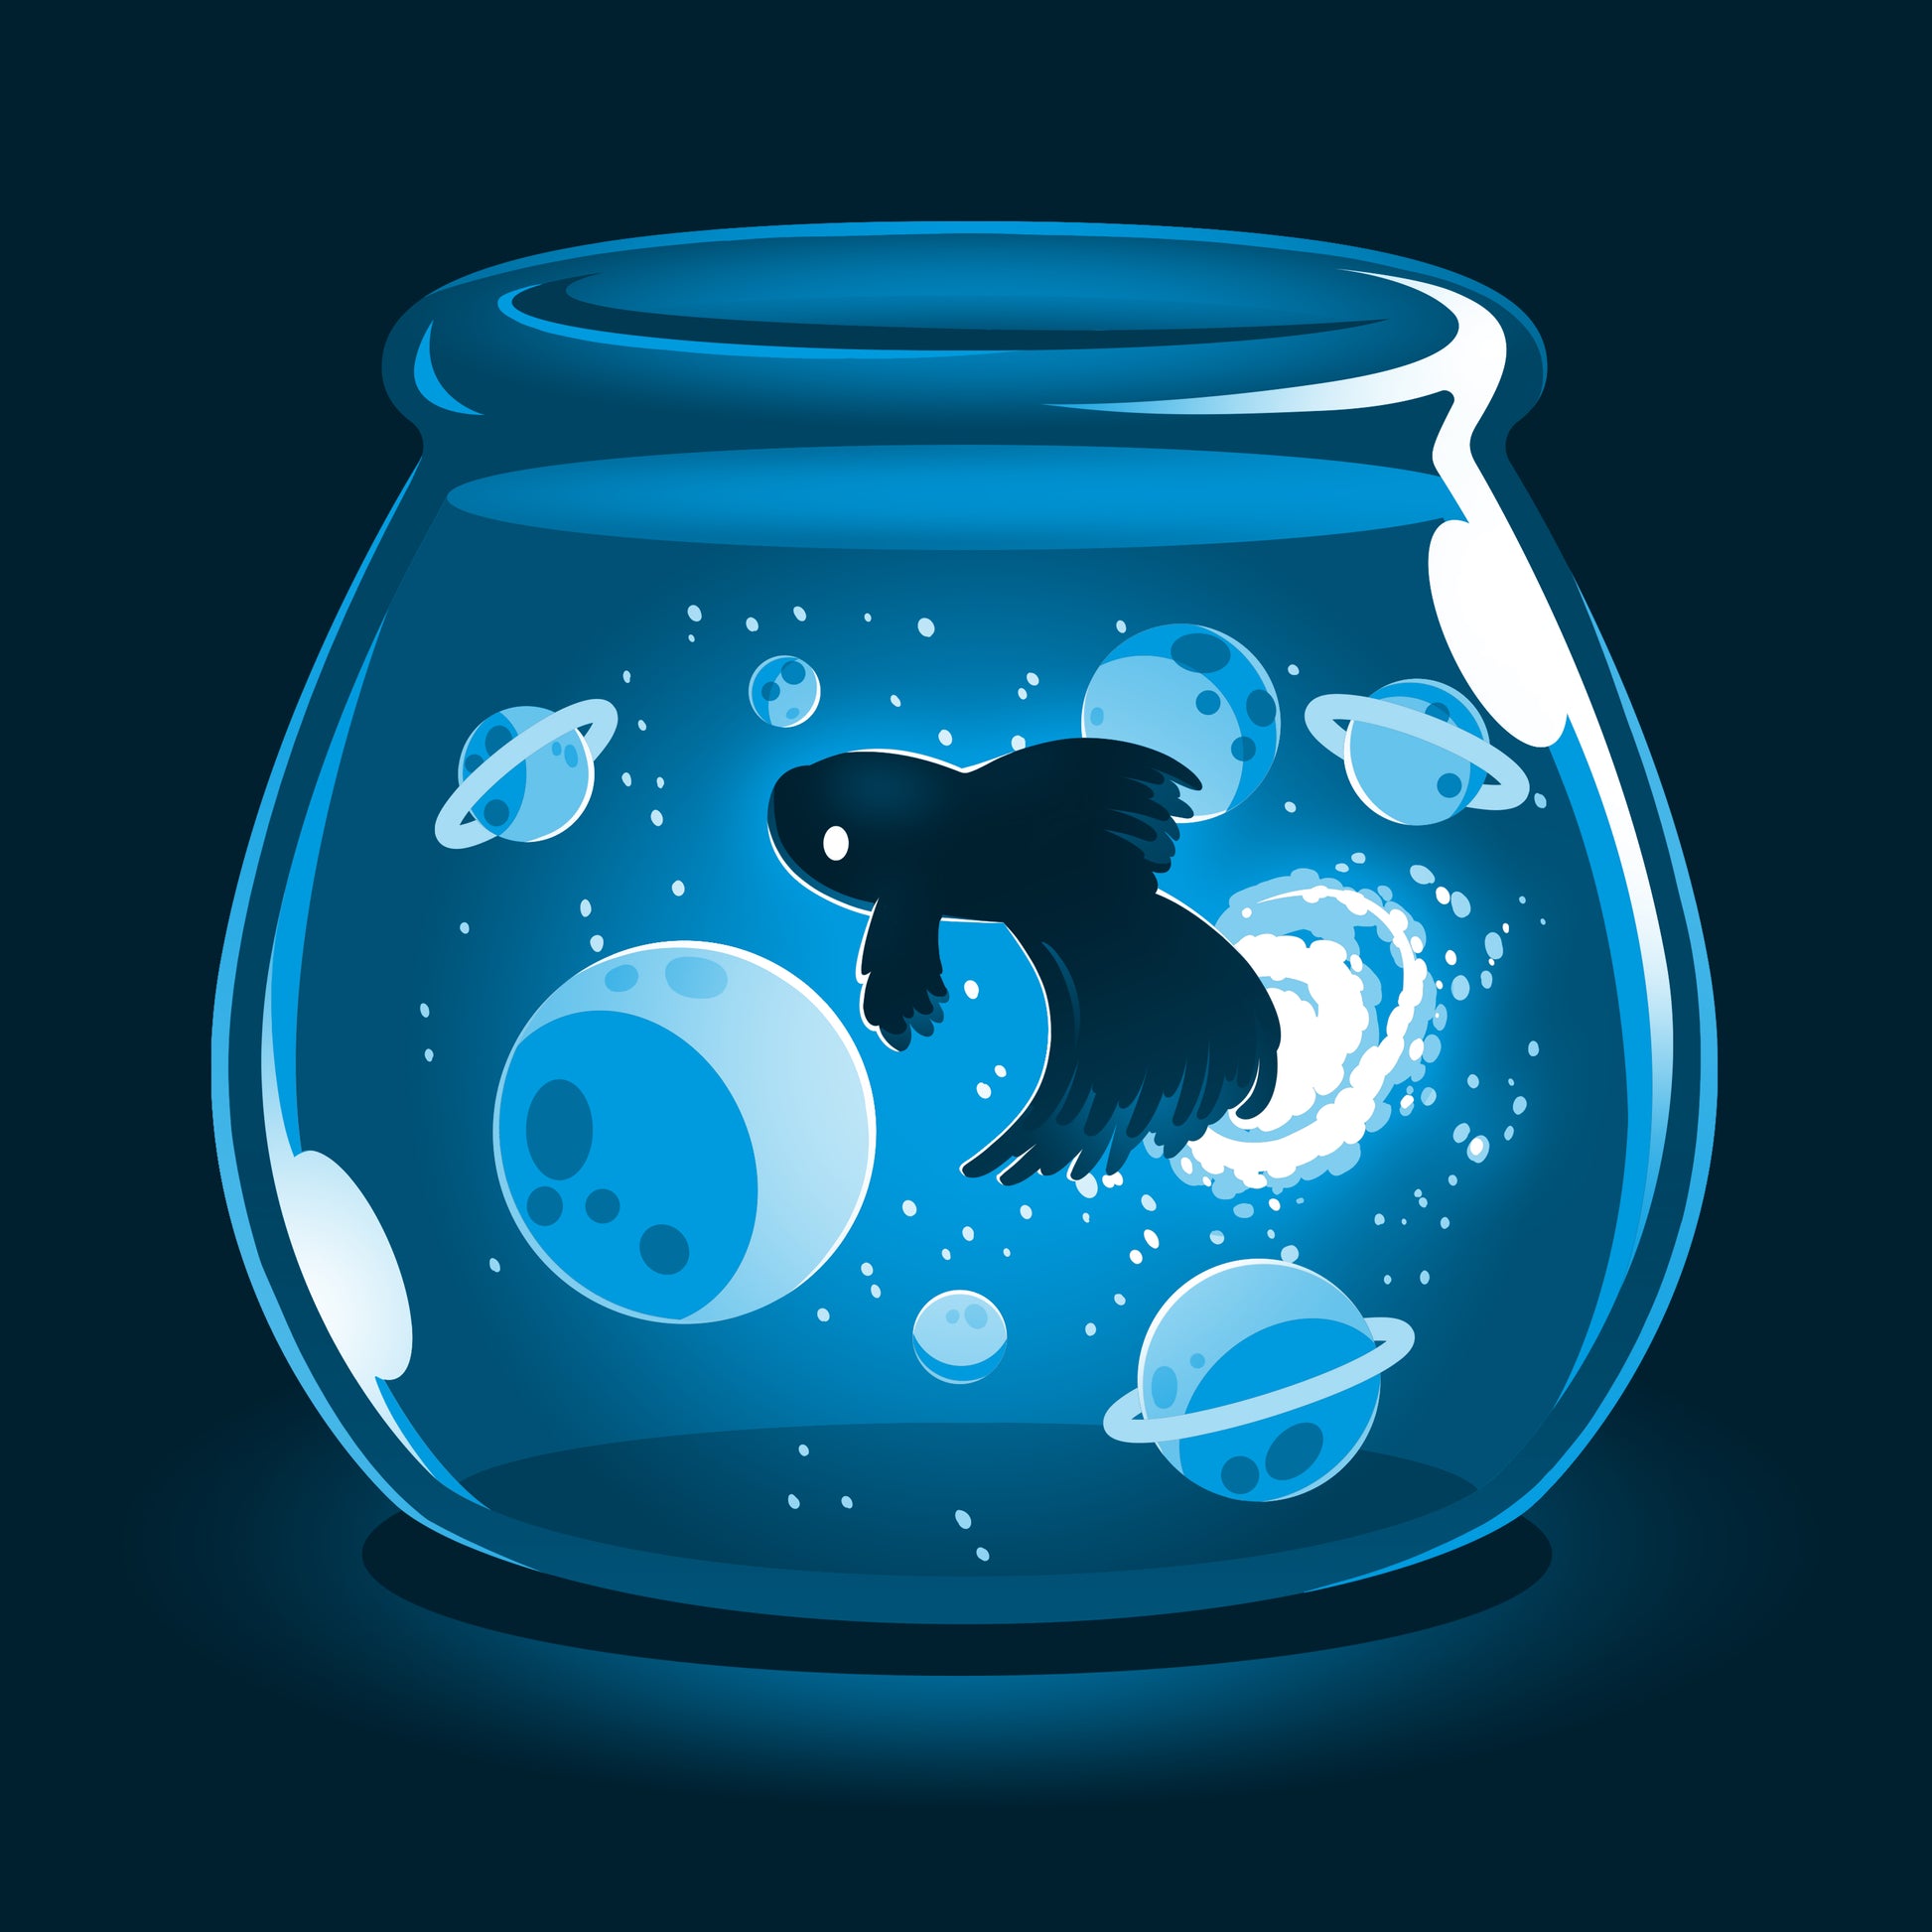 A Space Betta fish swimming in a bowl with stars in the background, made by TeeTurtle.